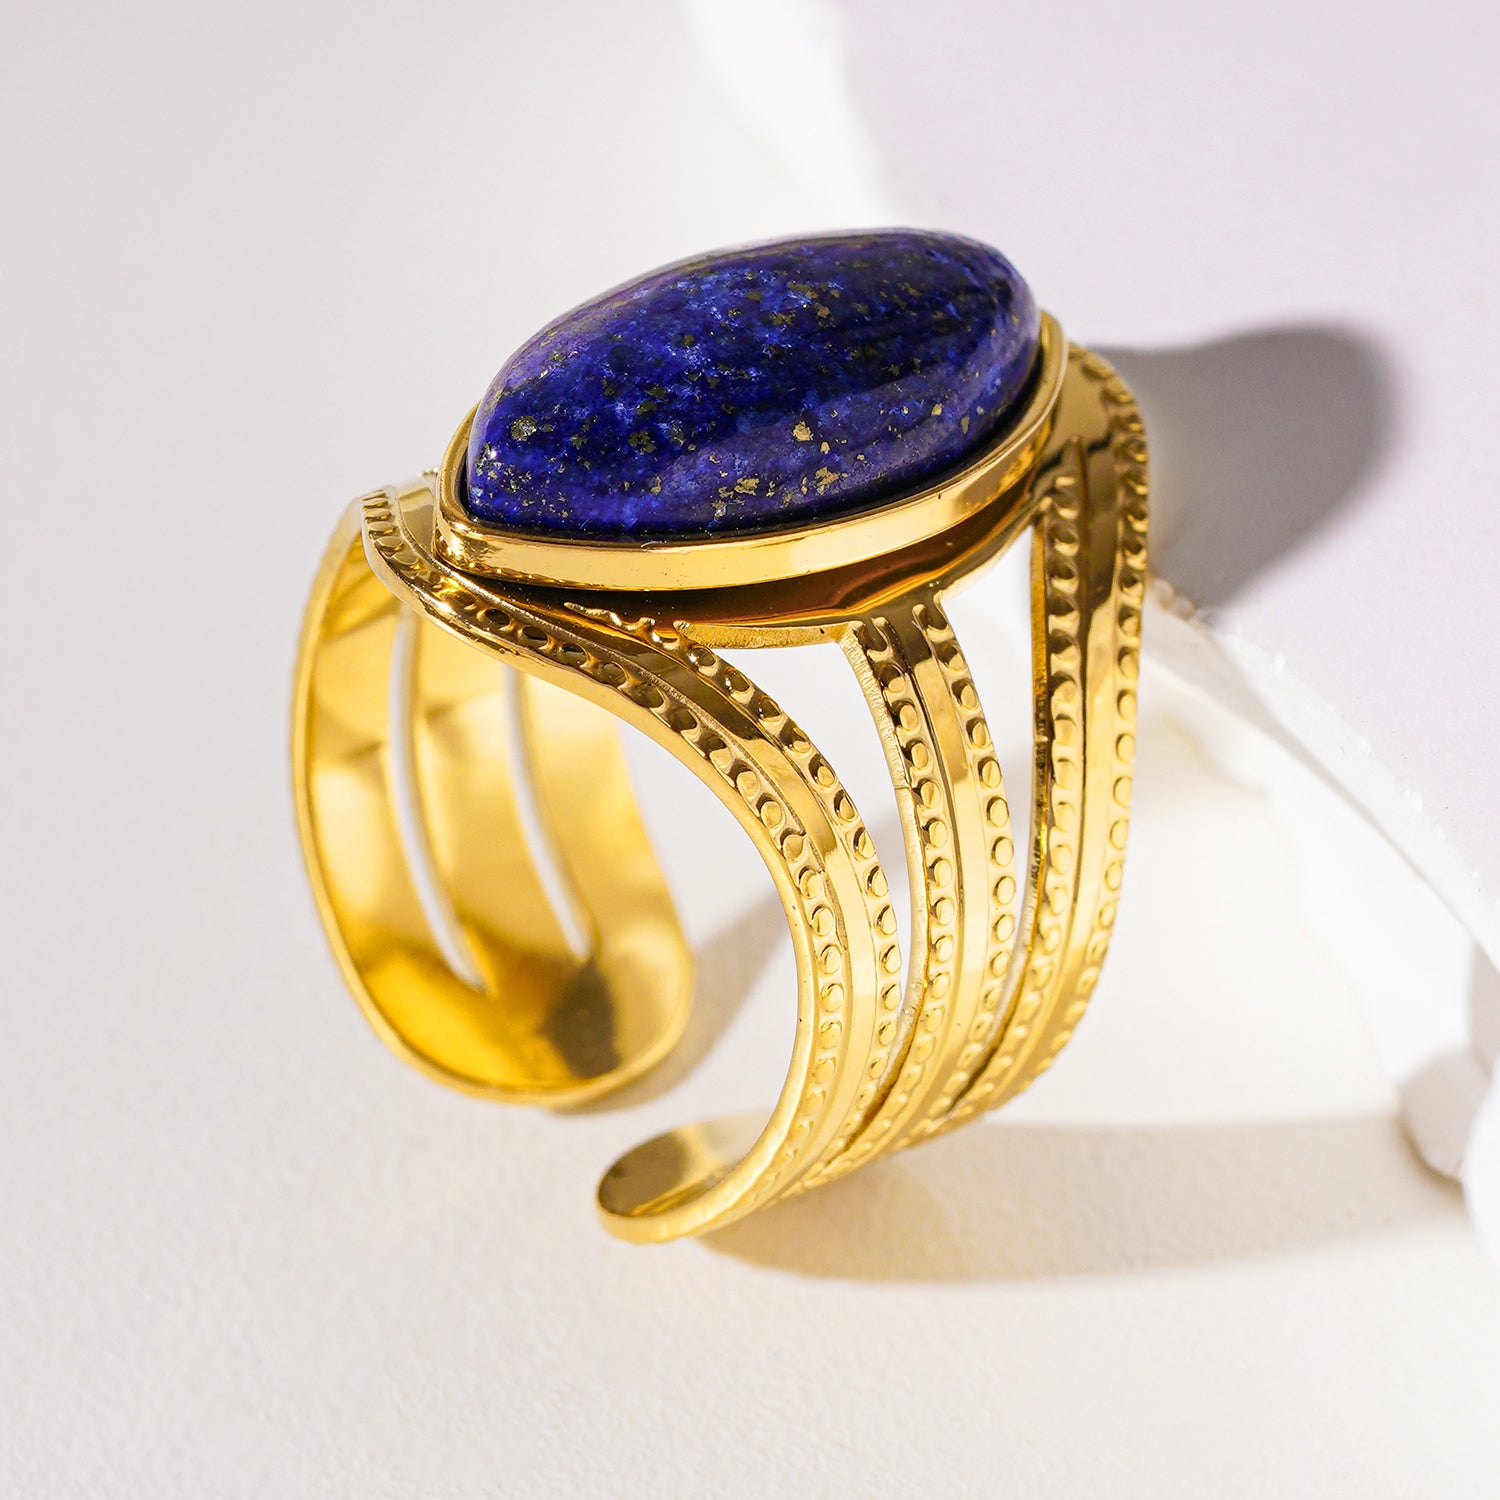 Style TIAMO 7348: Vintage Inspired Ring with Triple Ornate Bands &amp; a Lapis Lazuli Centre Piece.